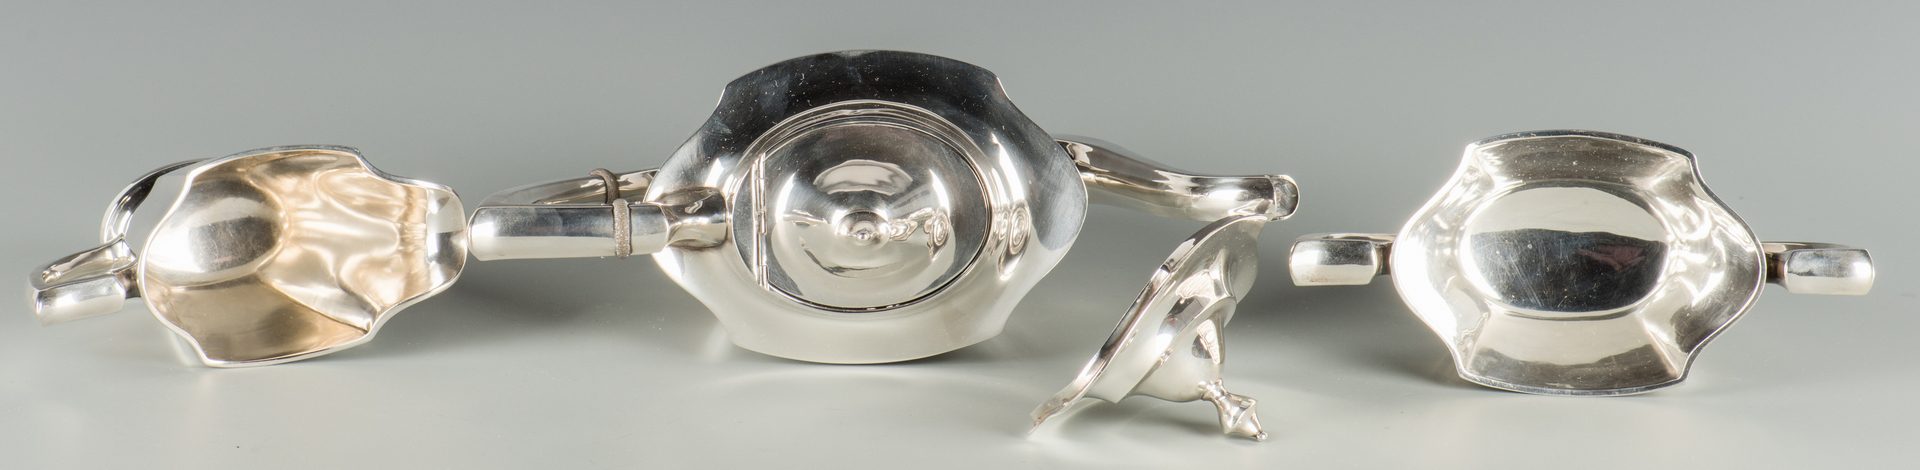 Lot 910: International Sterling Tea Set with silverplate tray